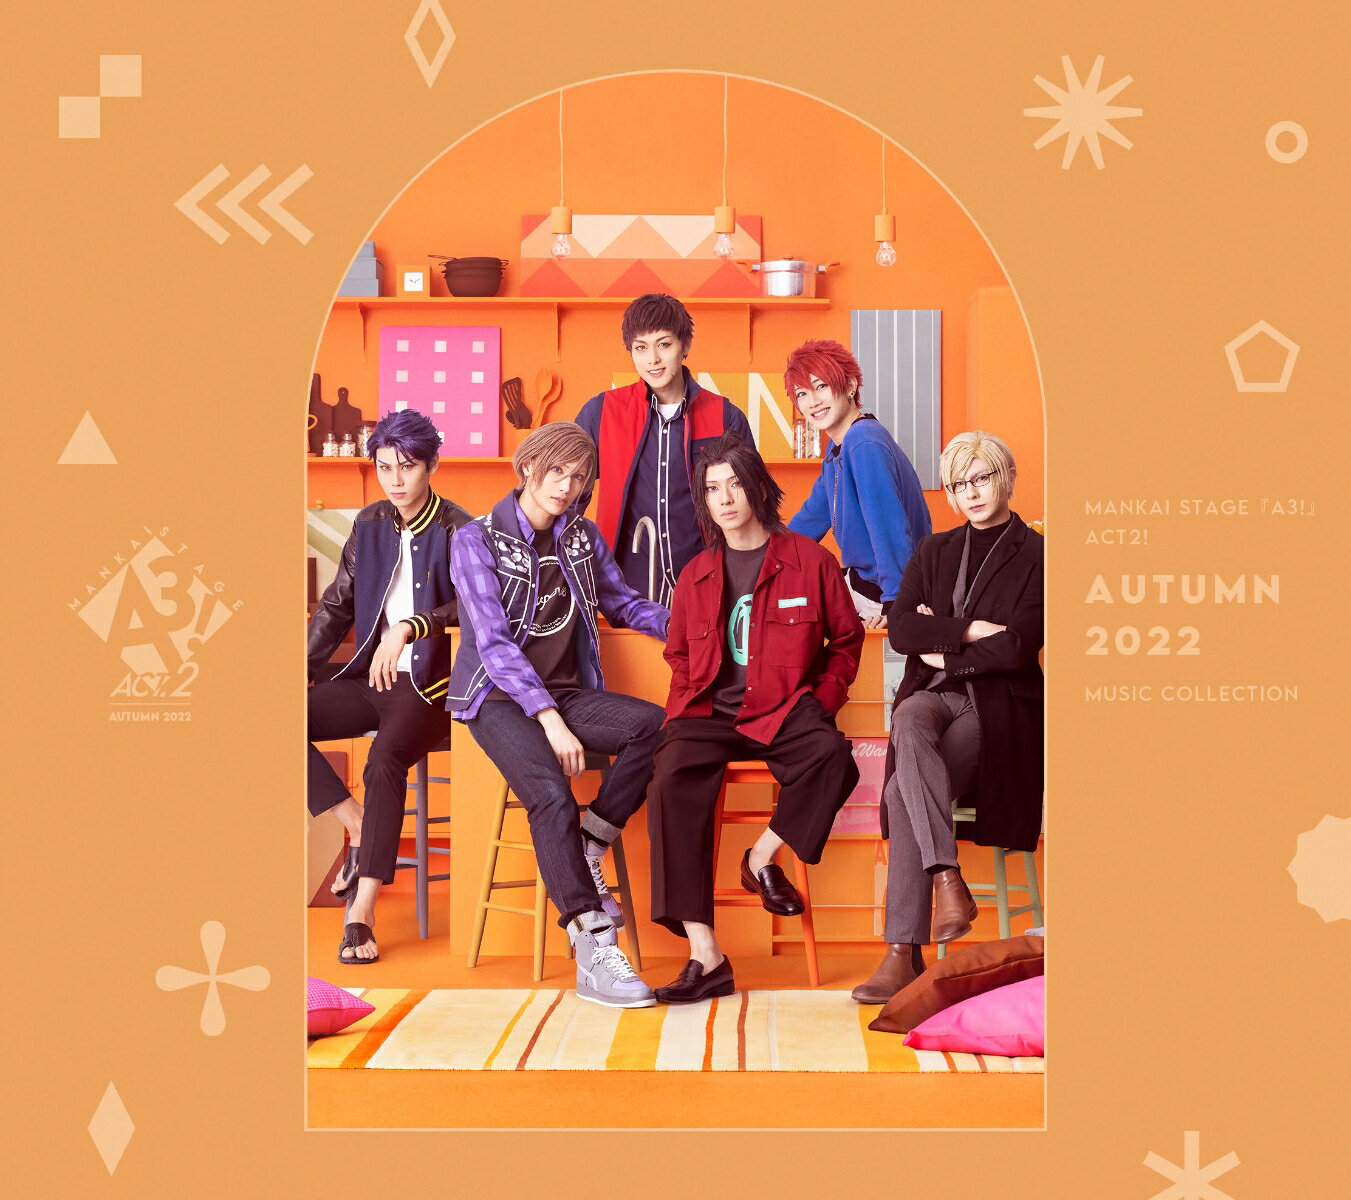 「MANKAI STAGE『A3 』ACT2 ～AUTUMN 2022～」MUSIC COLLECTION 秋組